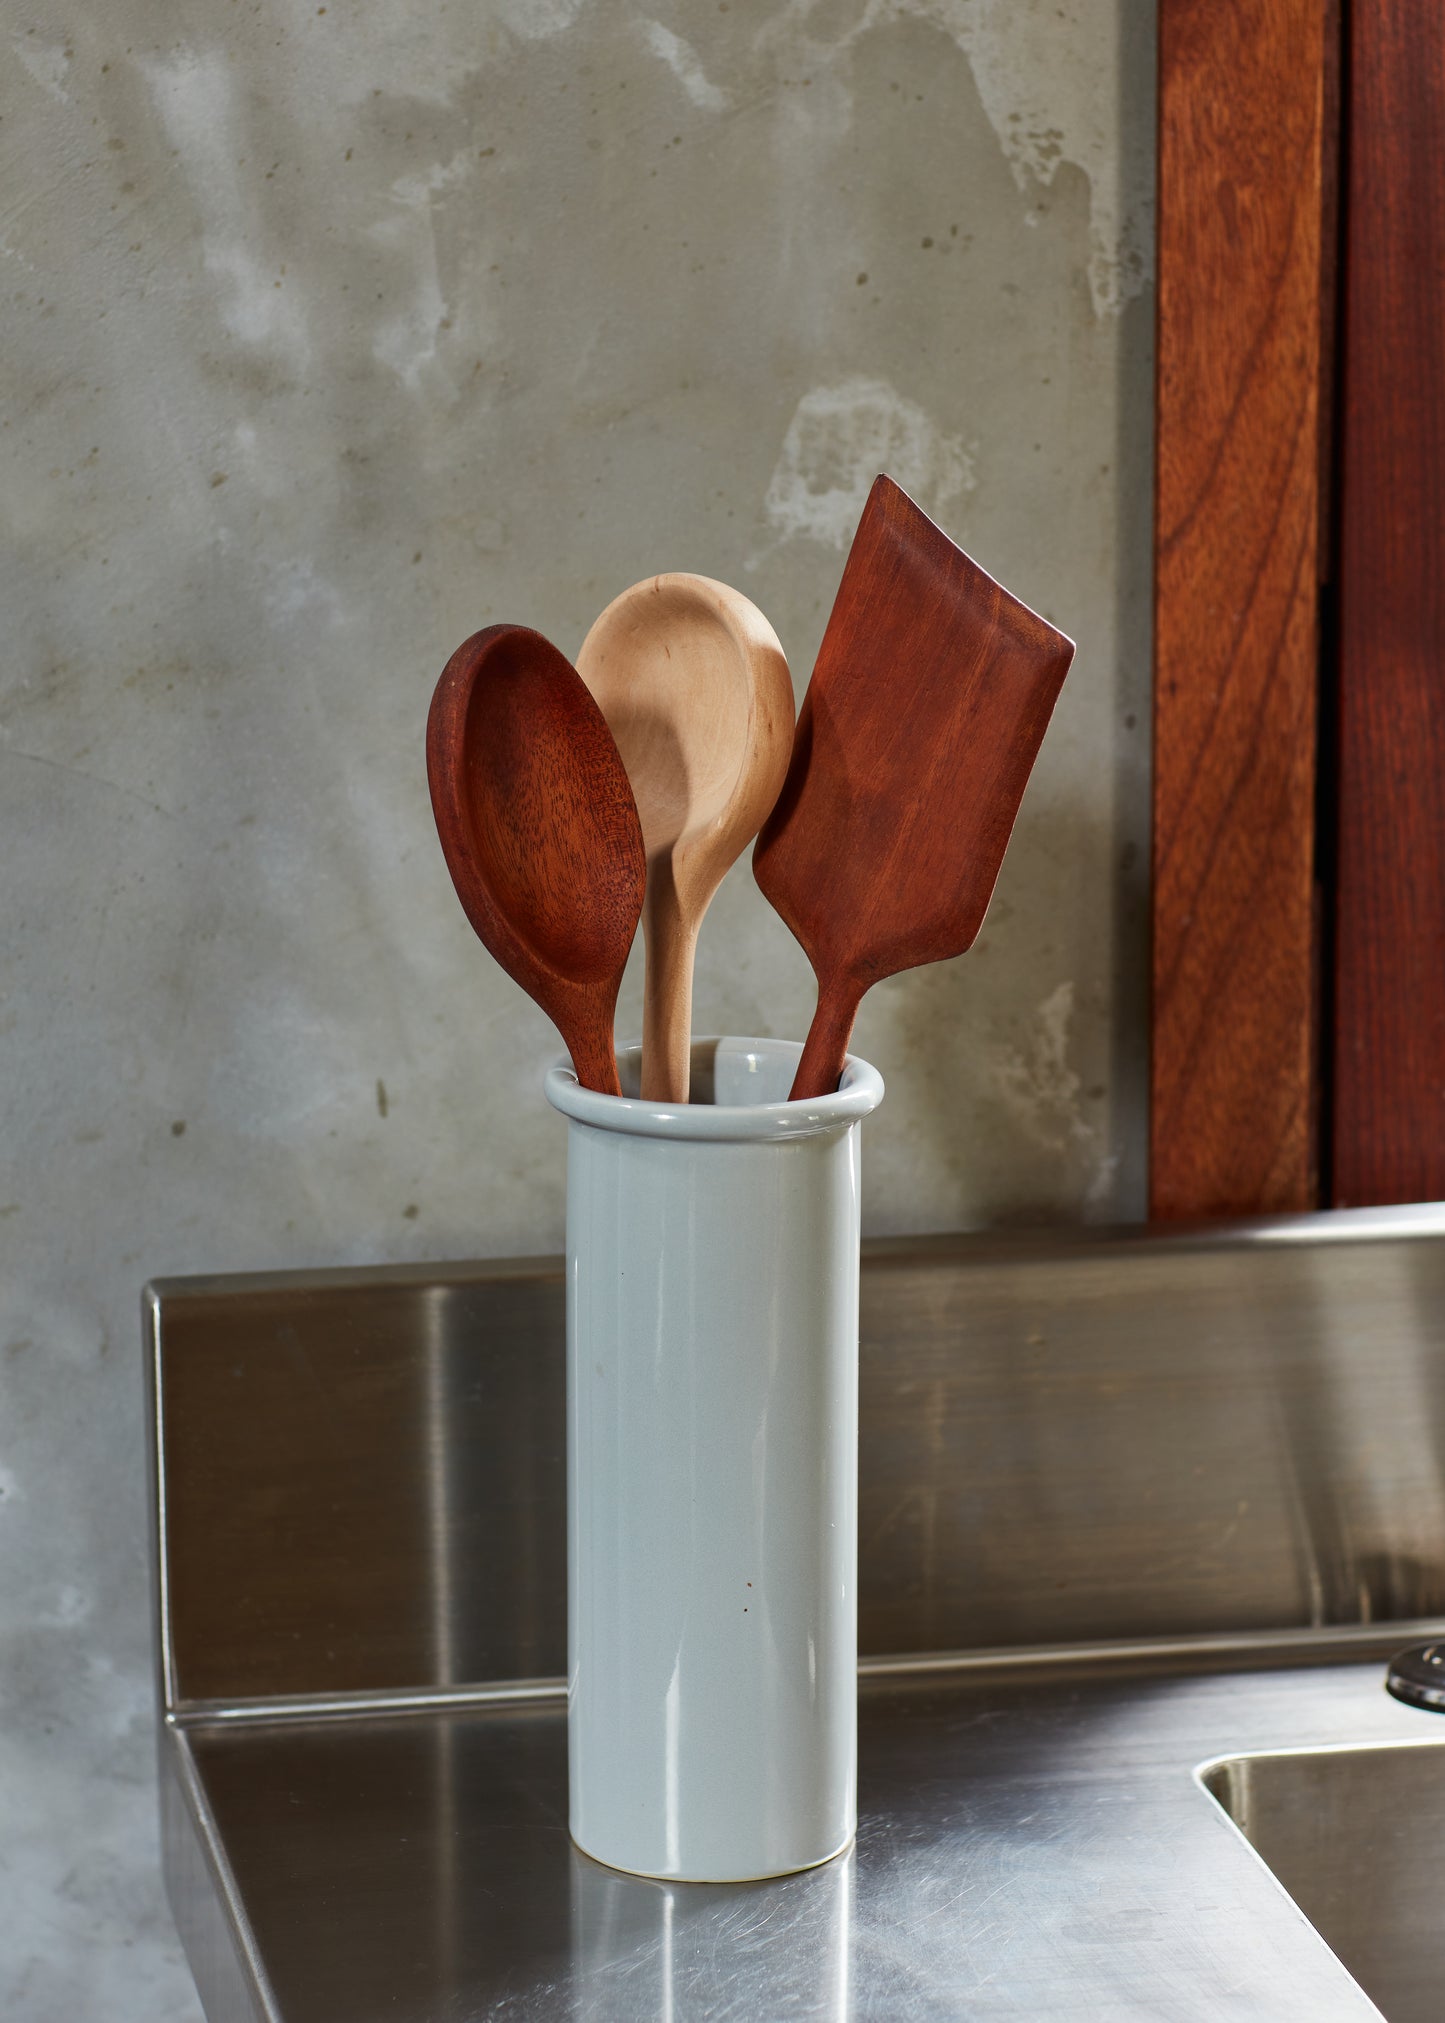 Cooking spoons and spatula shown as finished products in a holder on a counter | Melanie Abrantes Designs